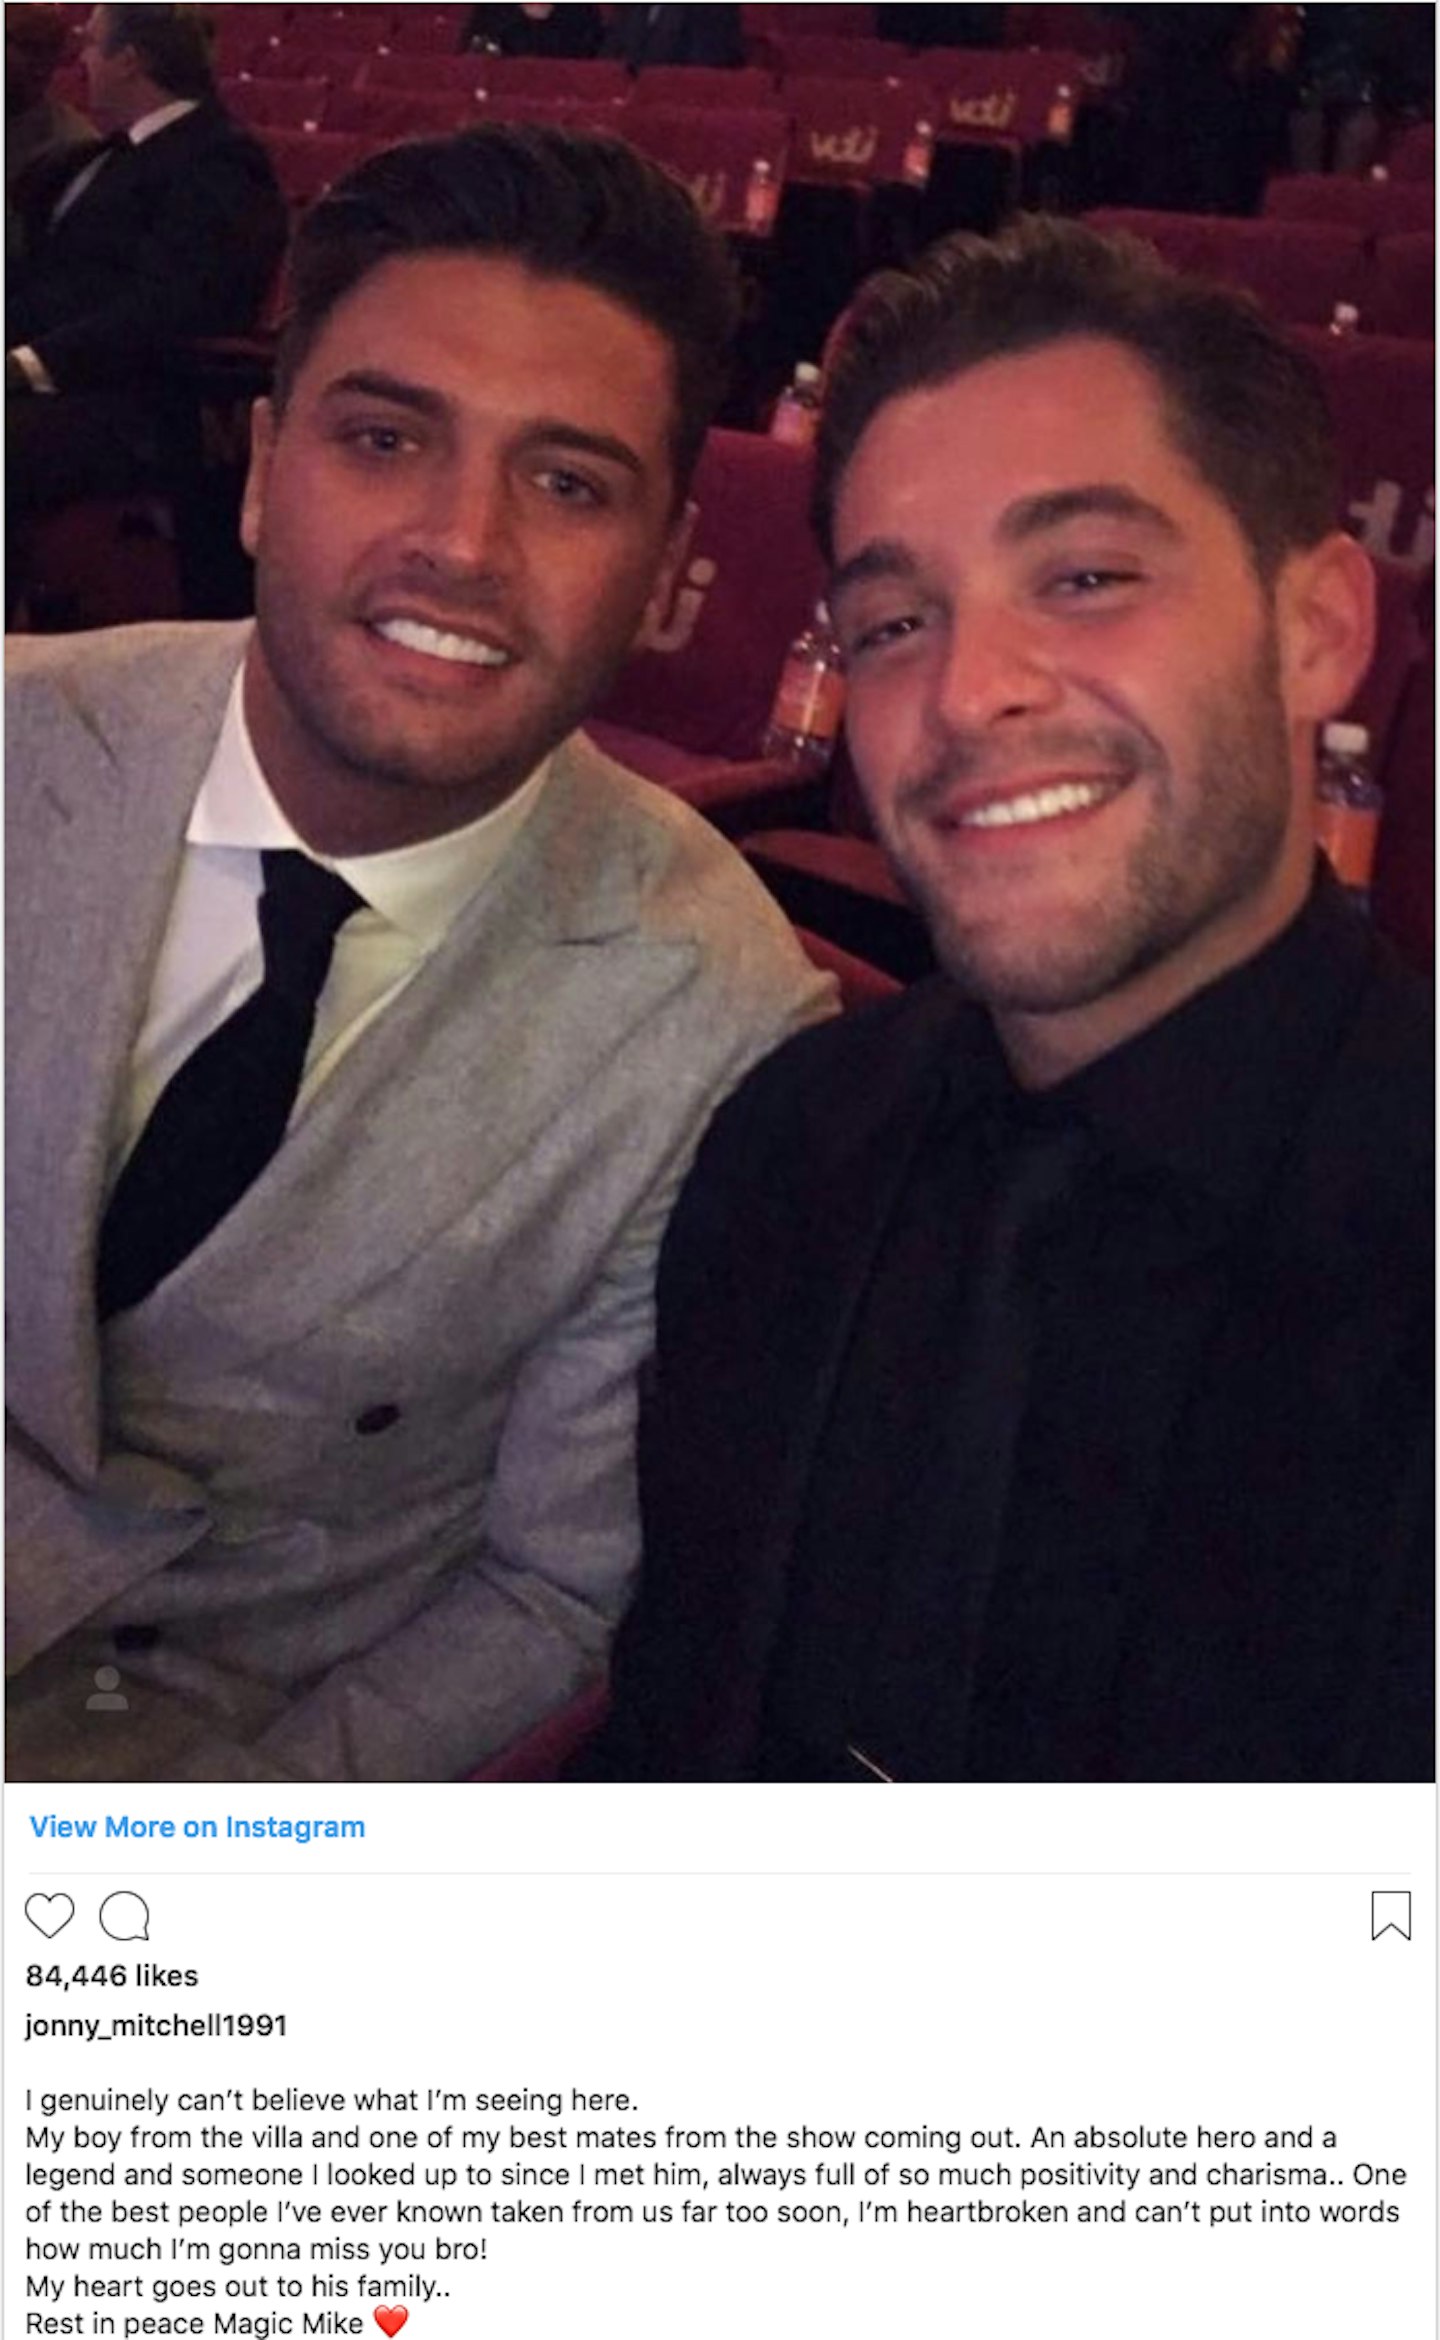 Johnny Mitchell pays tribute to Mike Thalassitis